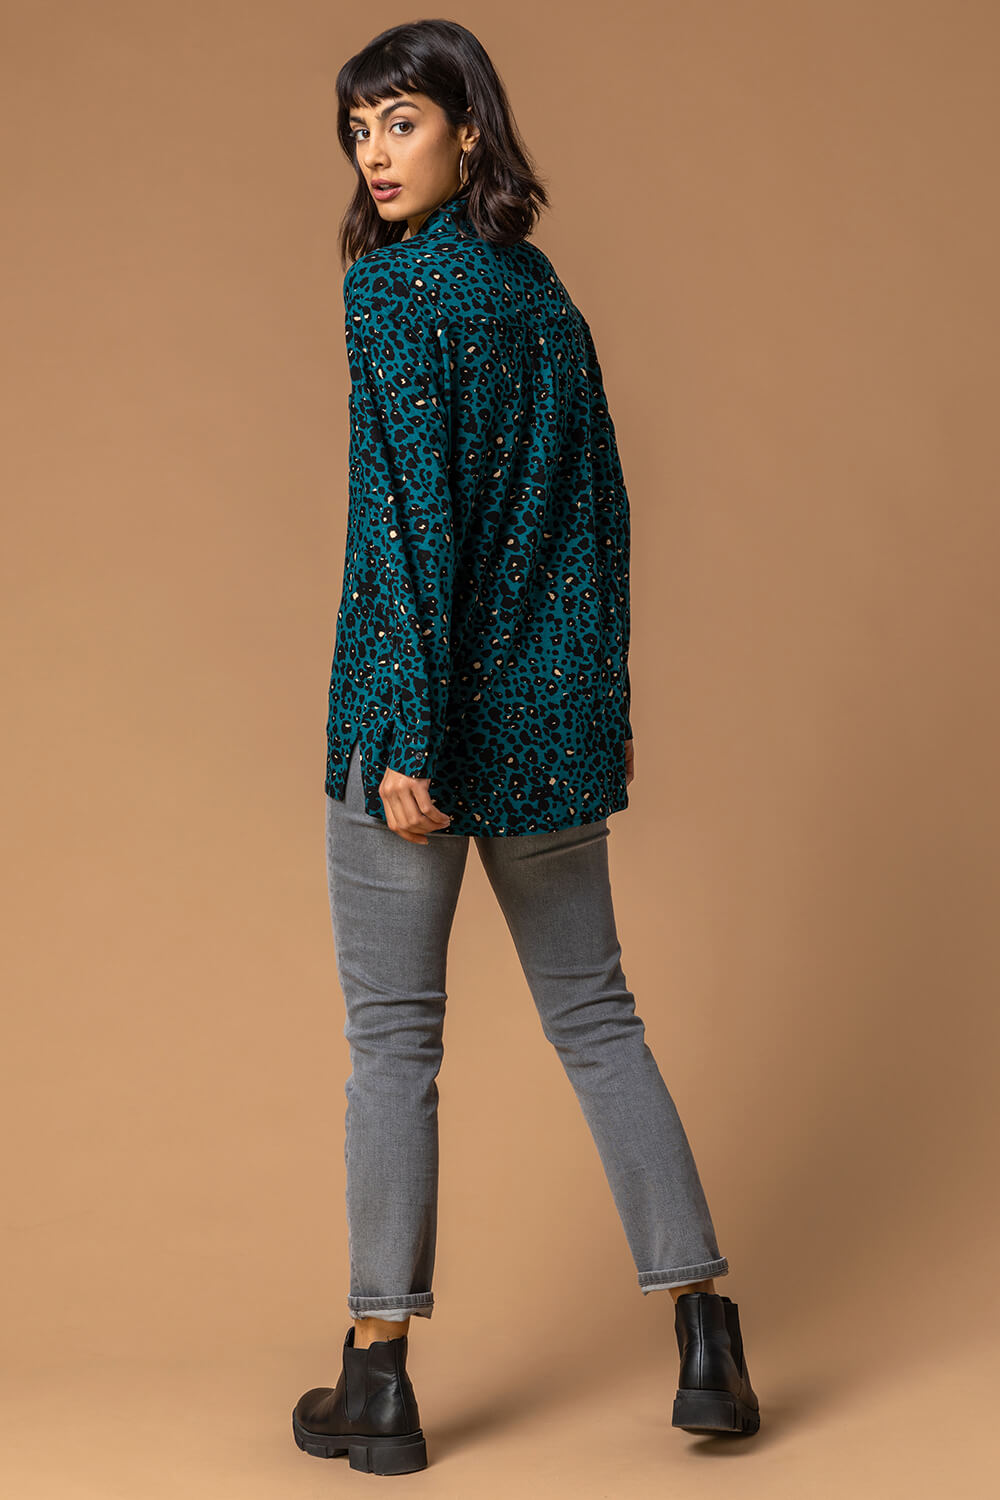 Teal Animal Print Jersey Buttoned Shirt, Image 2 of 4